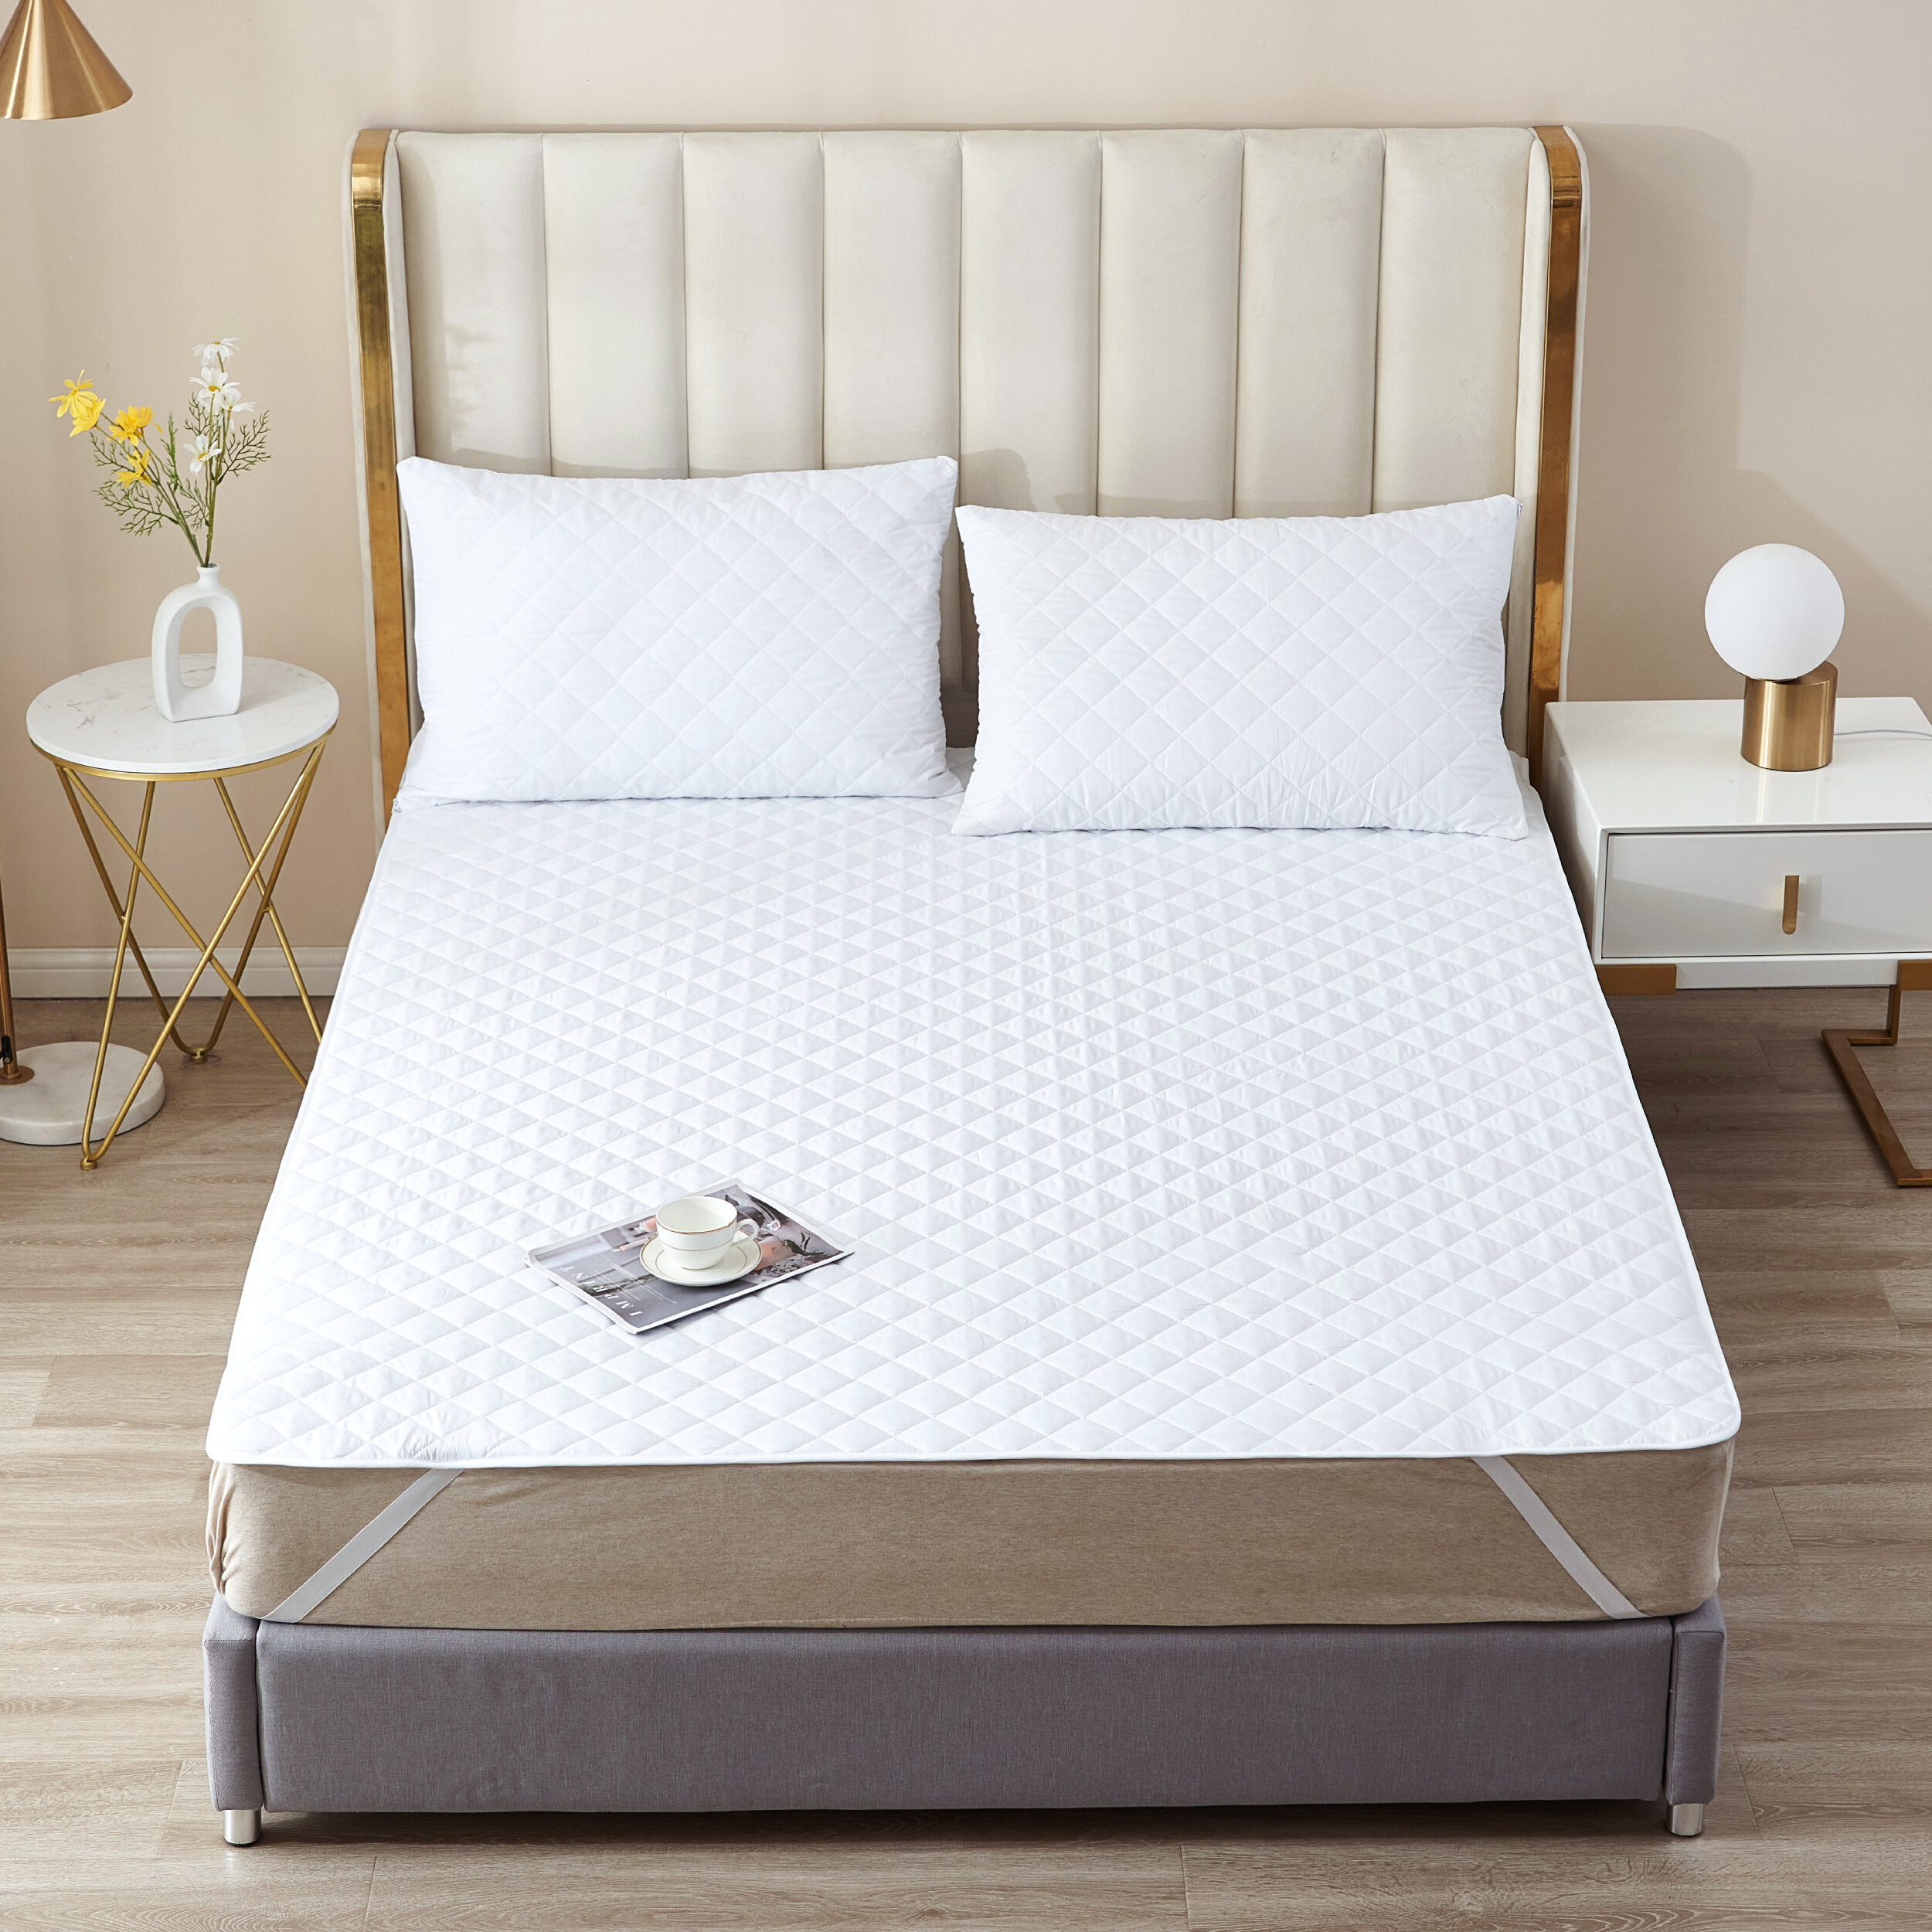 Soft Quilted Antimicrobial Waterproof (Twin XL) Mattress Pad | at Home